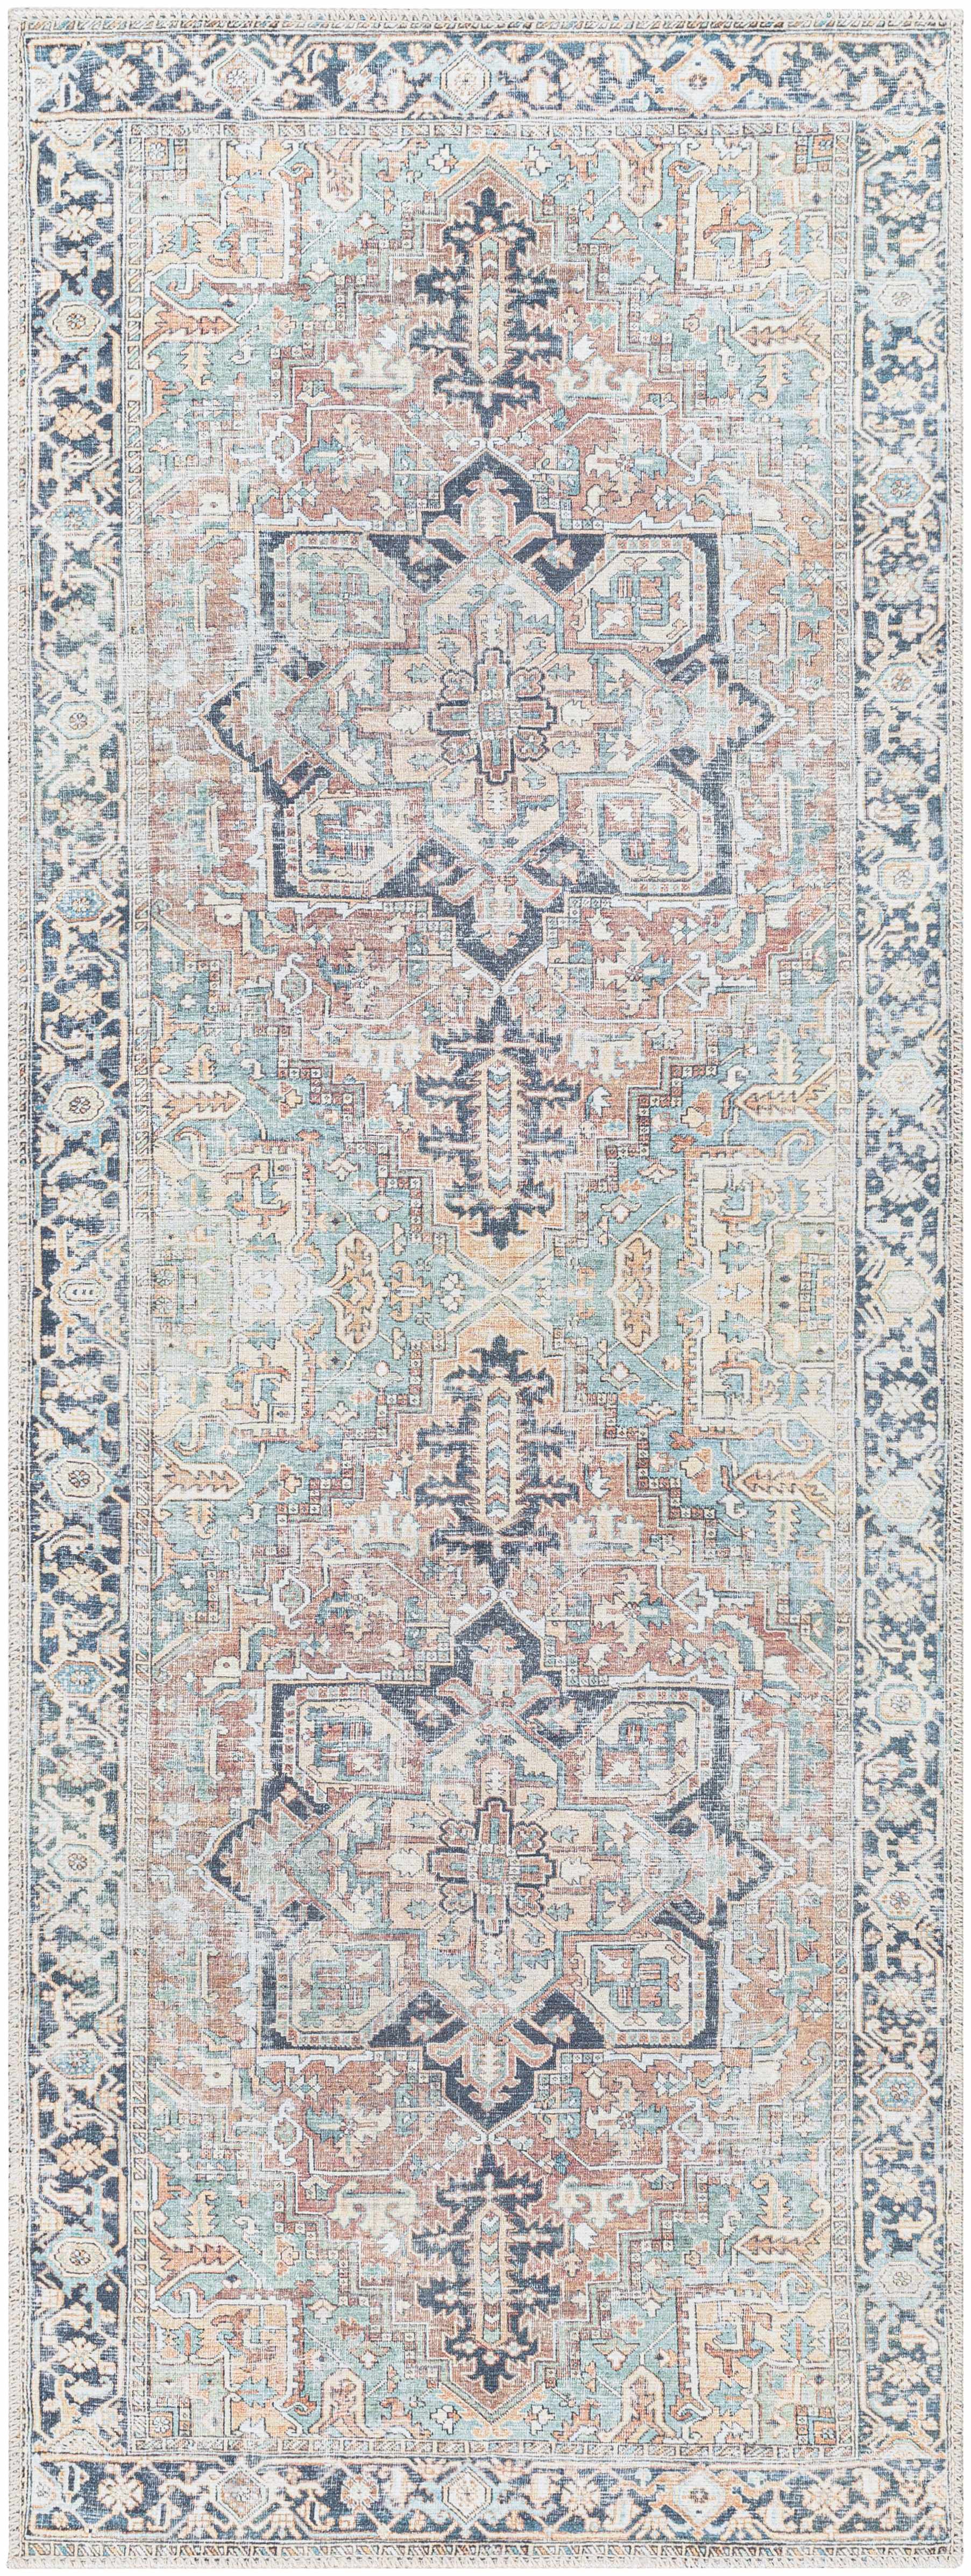 Santi Green and Grey Traditional Distressed Washable Rug